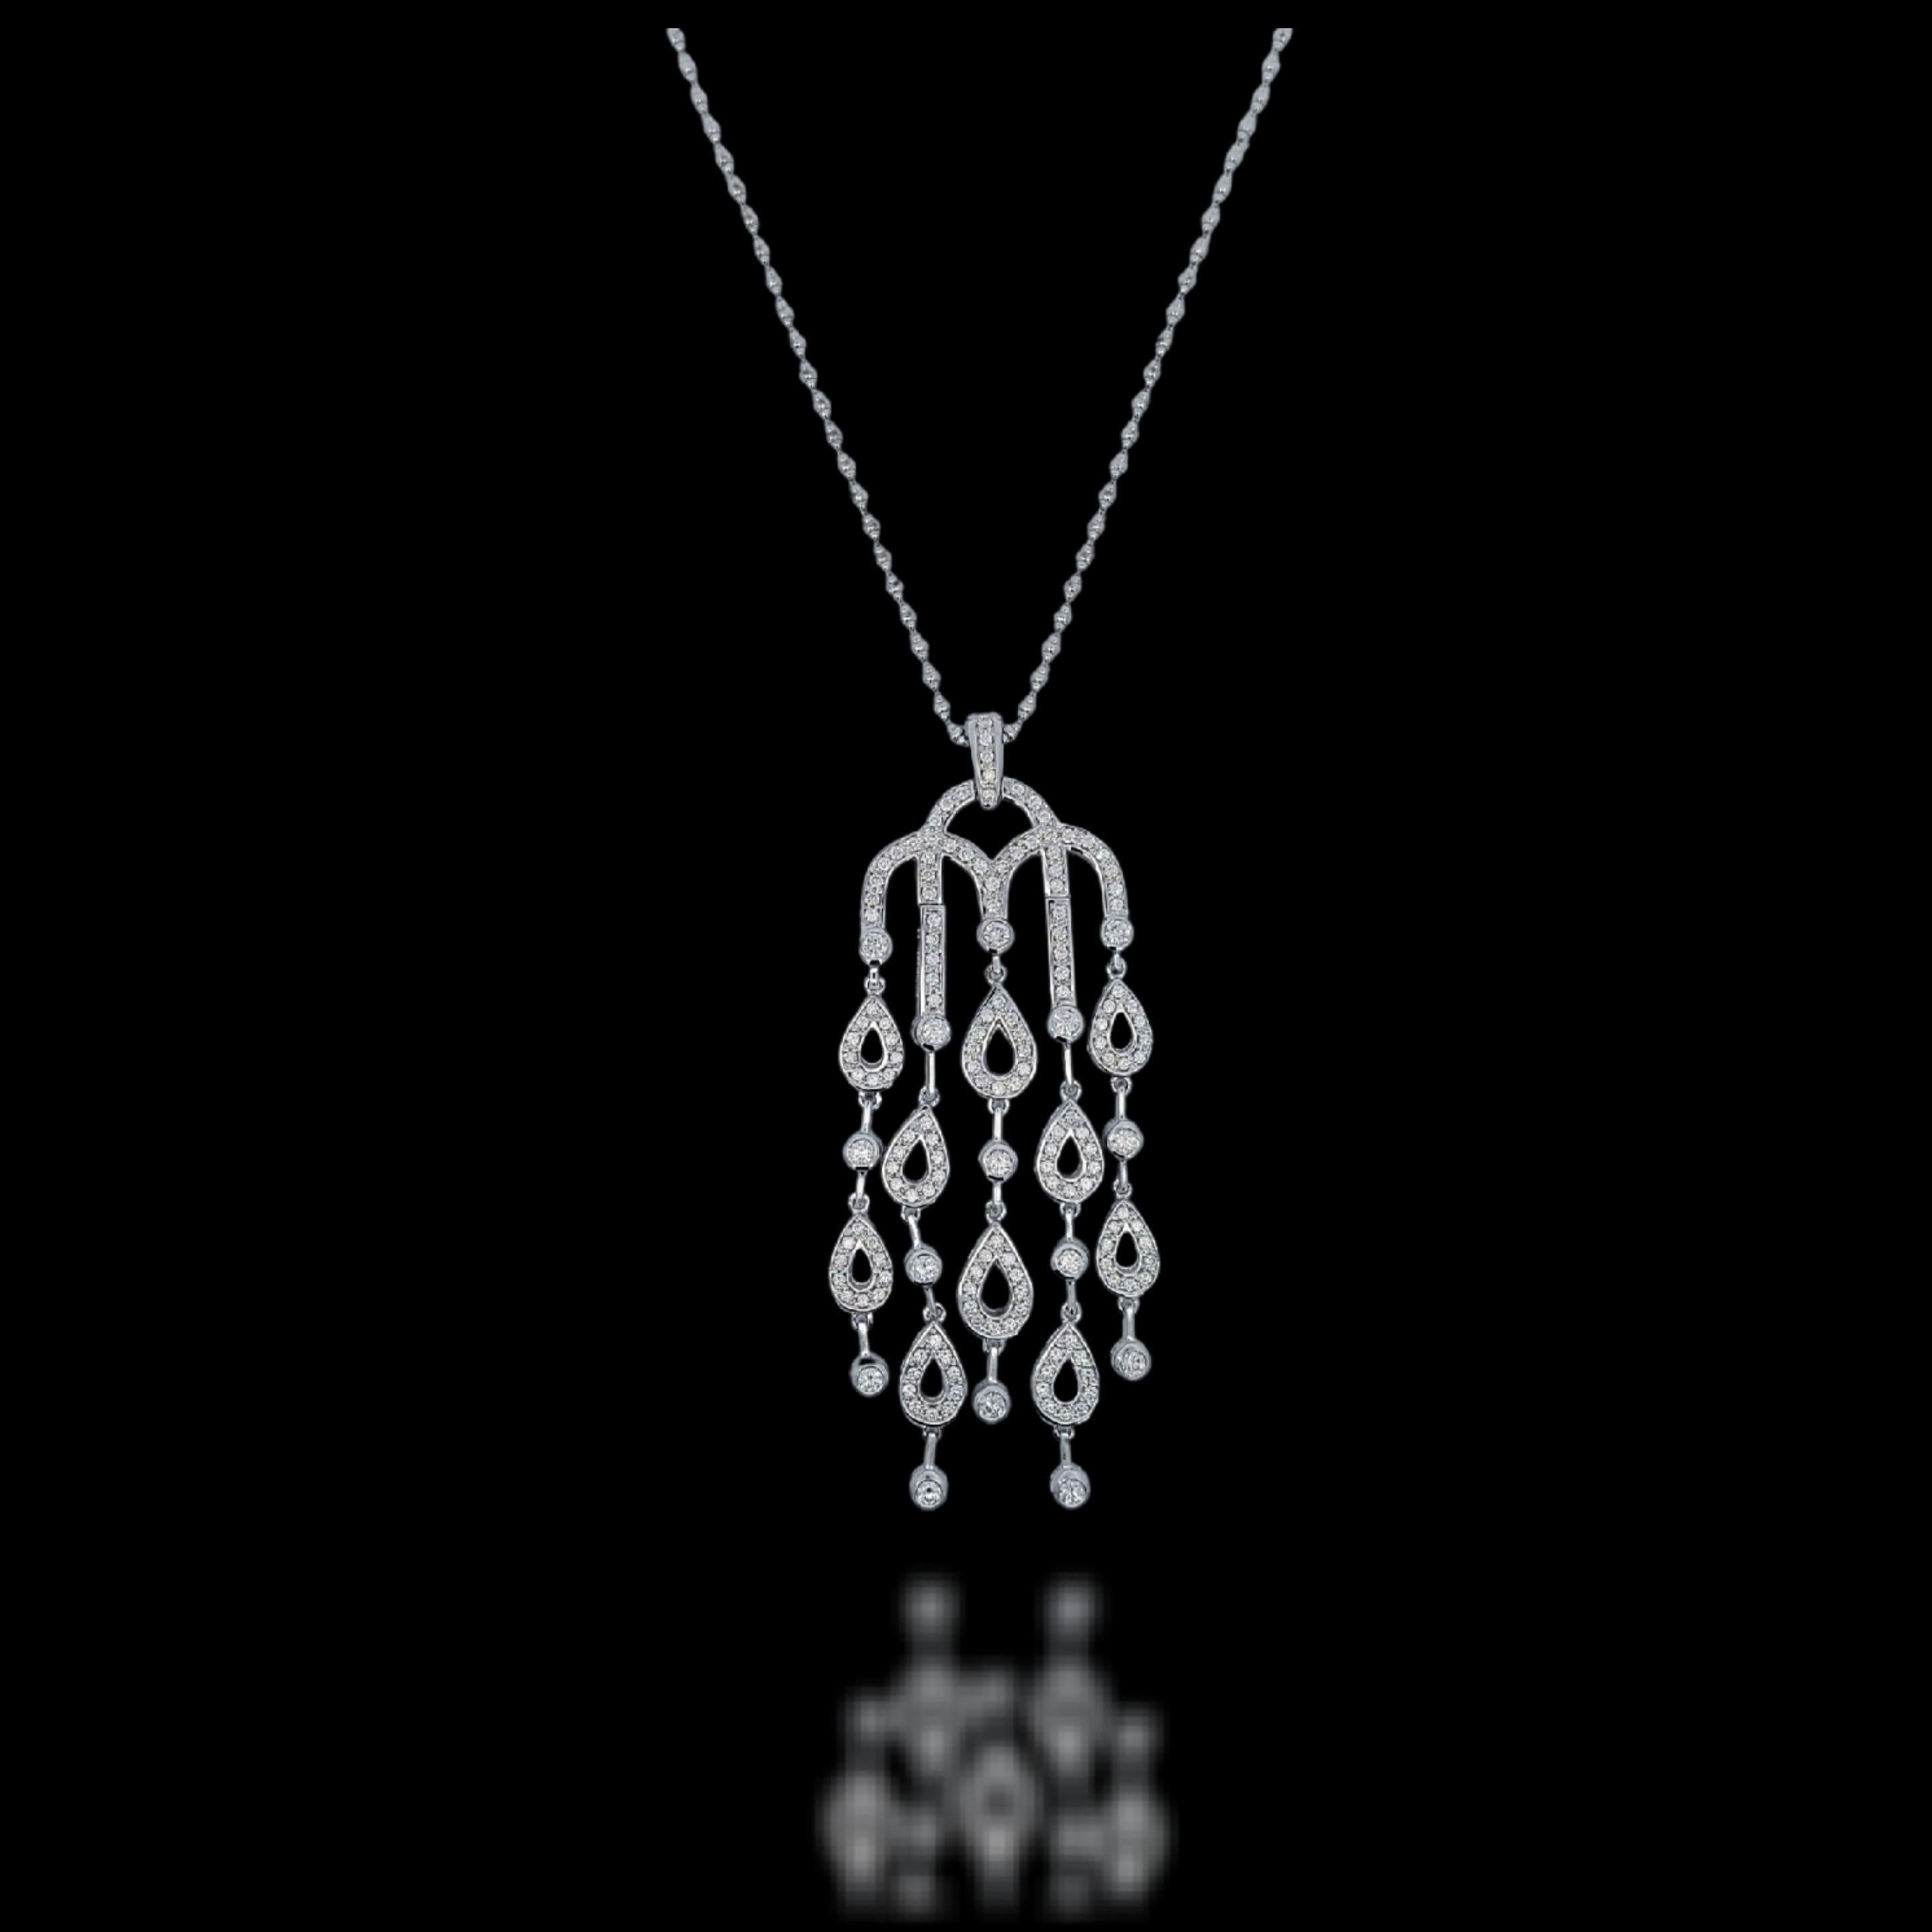 Women's or Men's Dangling Chandelier 18kt White Gold Necklace with 5.4ct Diamonds For Sale